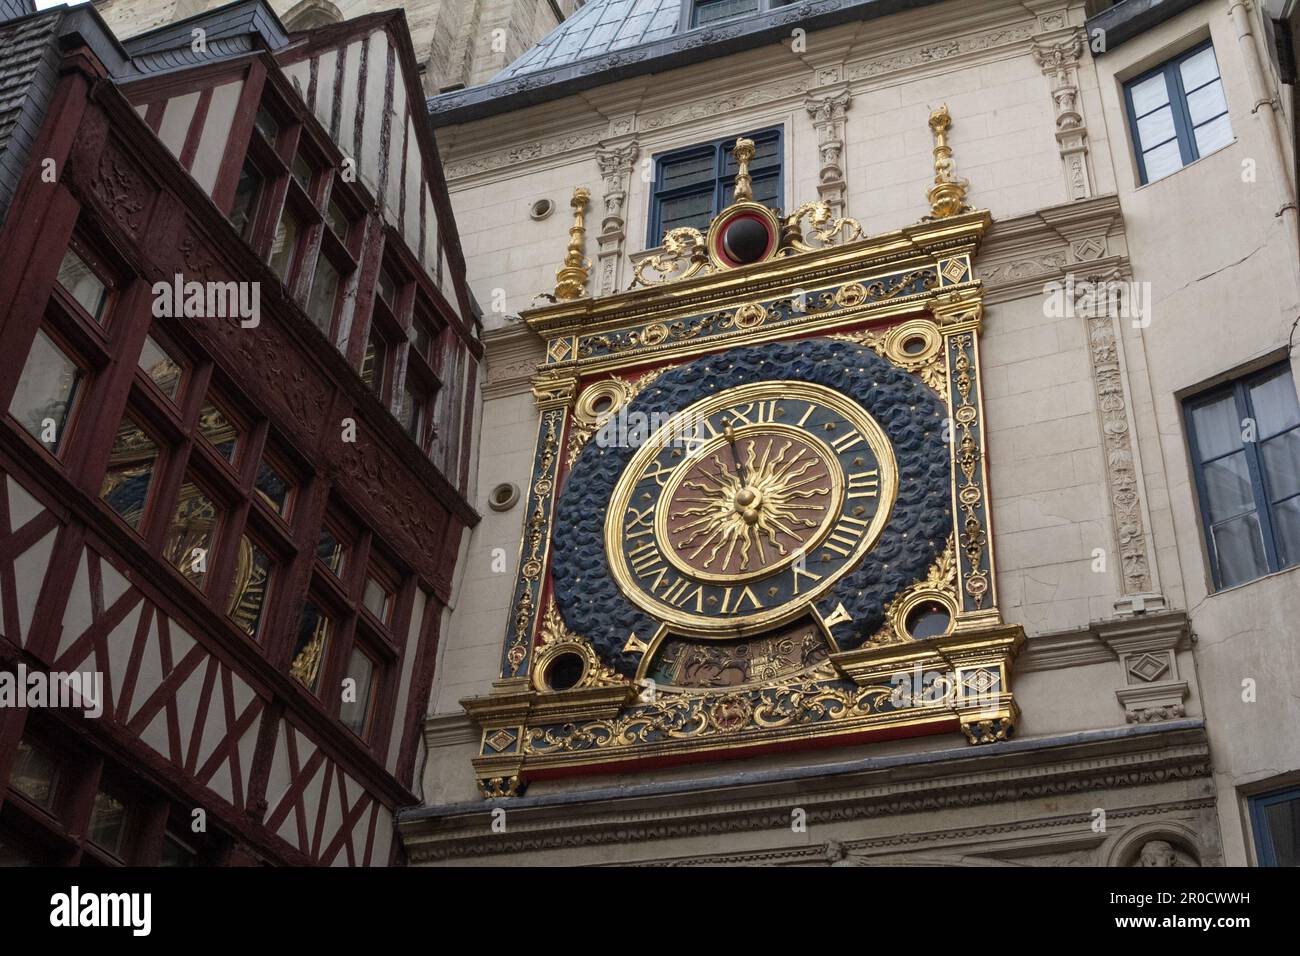 Rouen, France: the Gros Horloge, a 16th century clock in the city's heart has a face on both sides of a building that overarches the eponymous street. Stock Photo